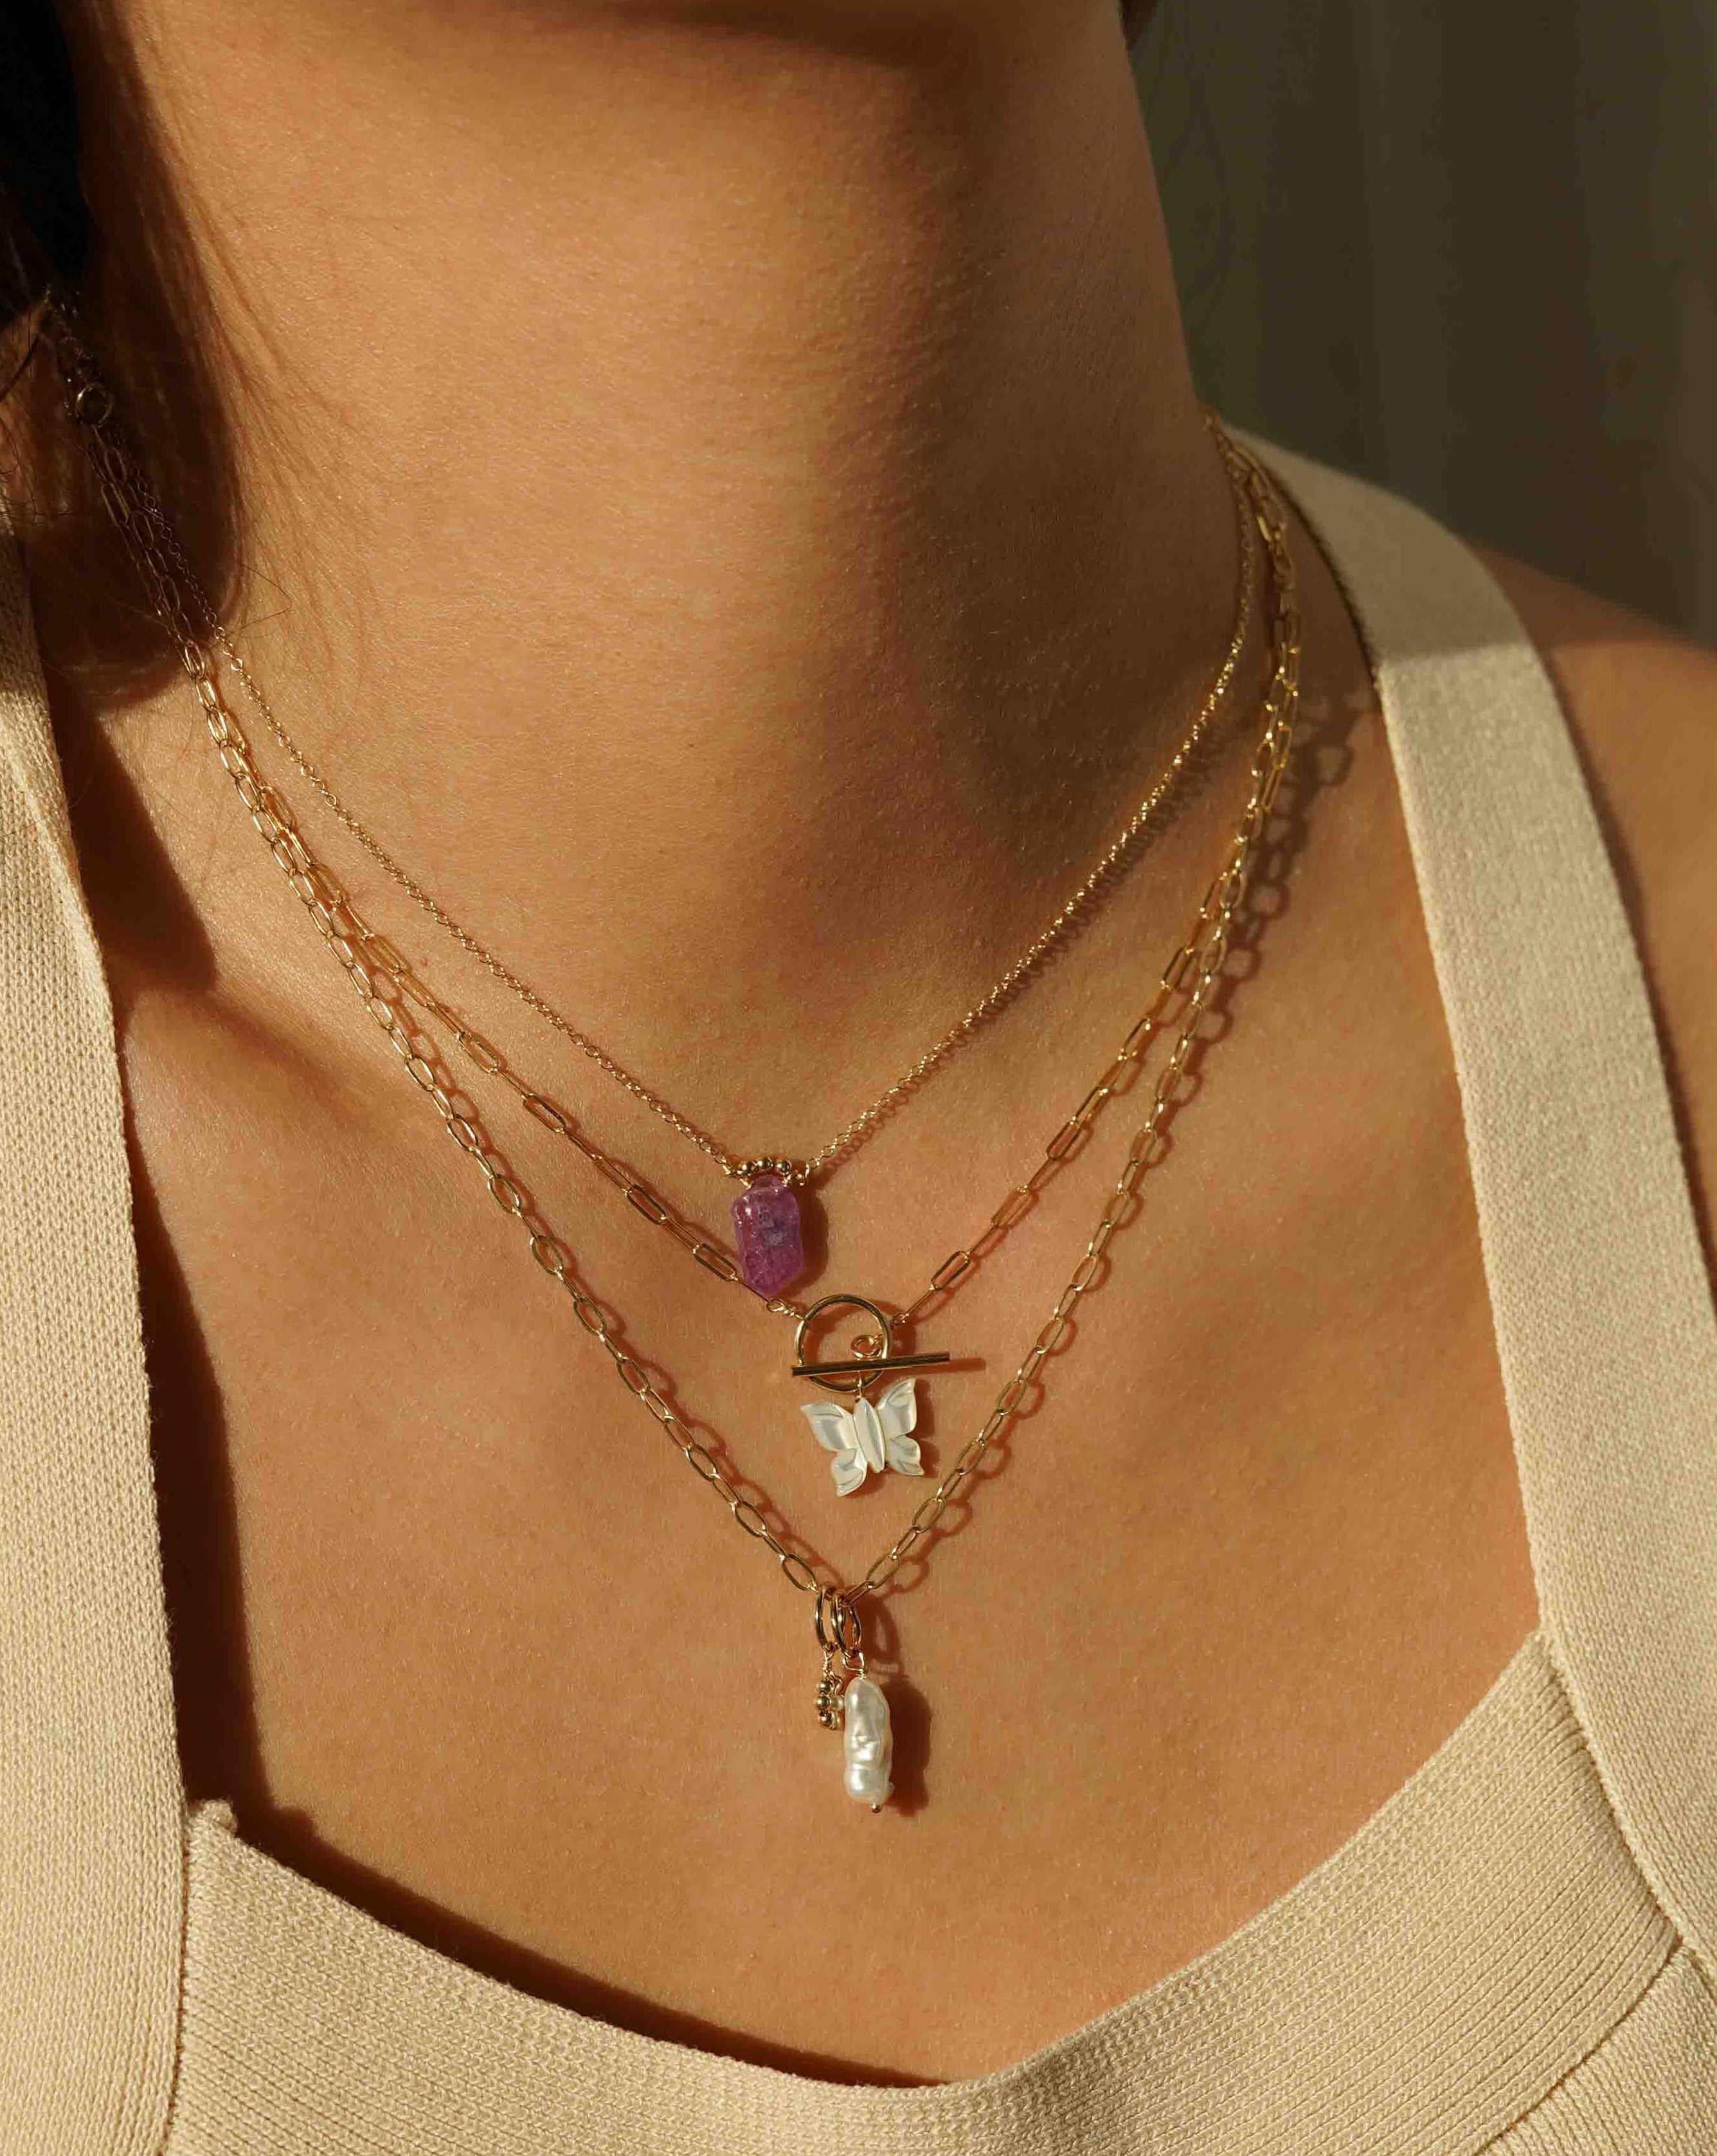 Arlette Necklace by KOZAKH. A 16 to 18 inch adjustable length necklace in 14K Gold Filled, featuring a hand-carved Mother of Pearl butterfly charm and a toggle closure at front of the necklace.